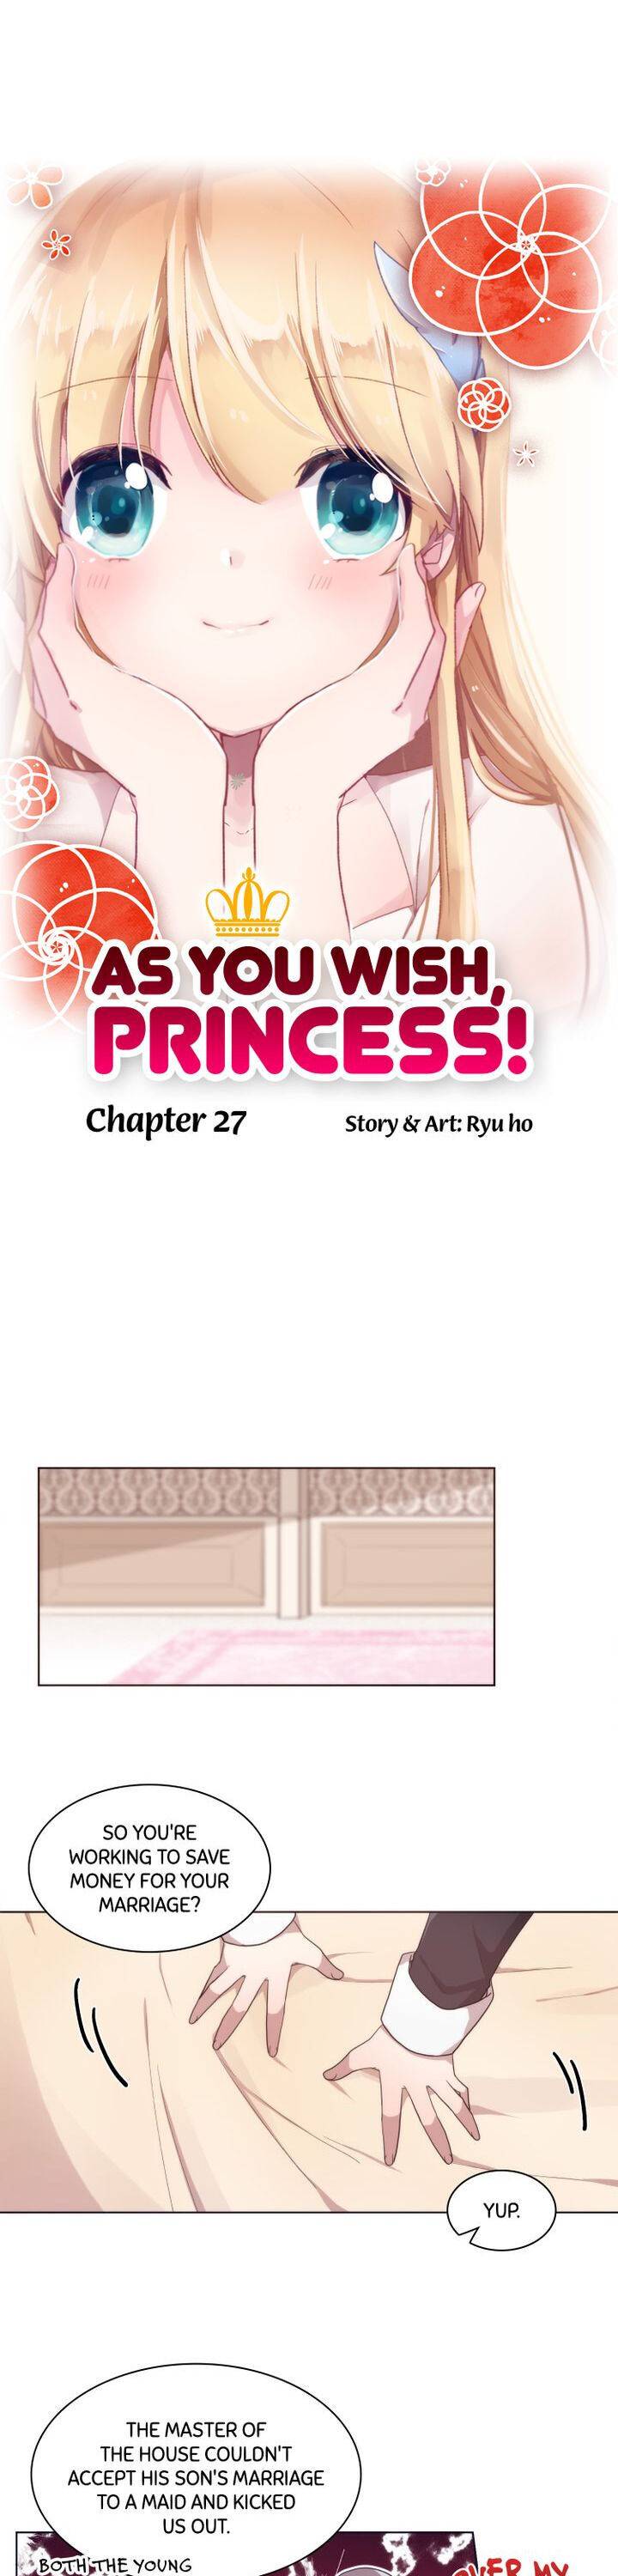 Whatever The Princess Desires! - Page 1